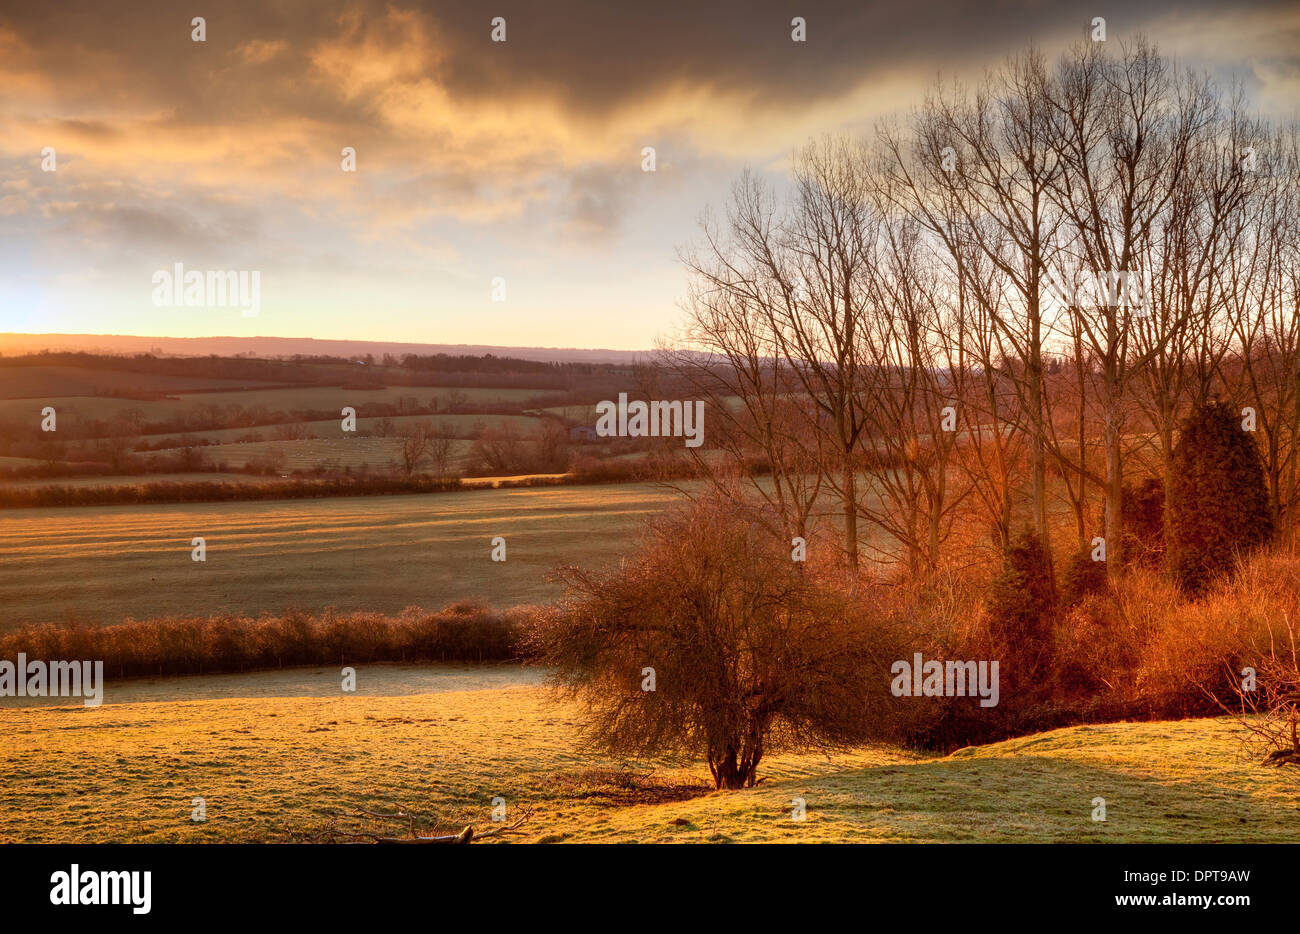 Farmland near Chipping Campden, Cotswolds, Gloucestershire, England. Stock Photo